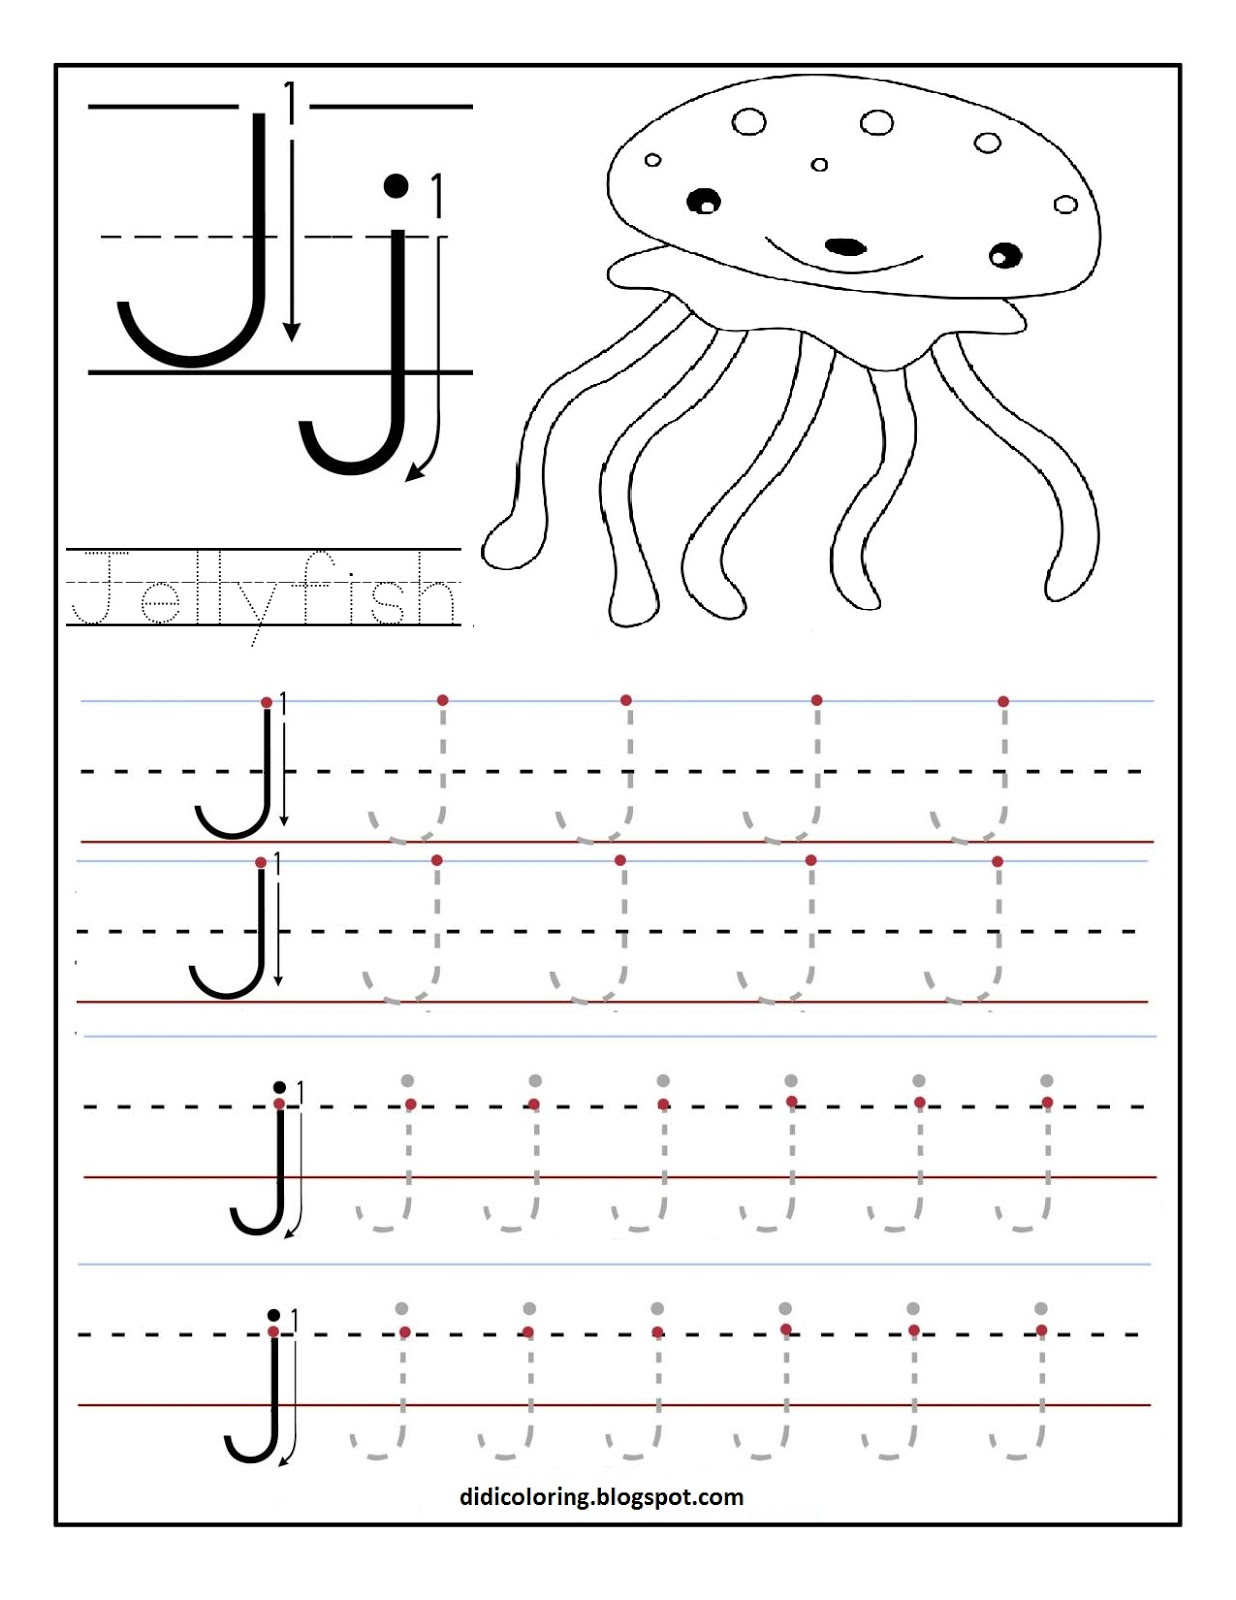 Didi coloring Page: Free printable worksheet letter J for your